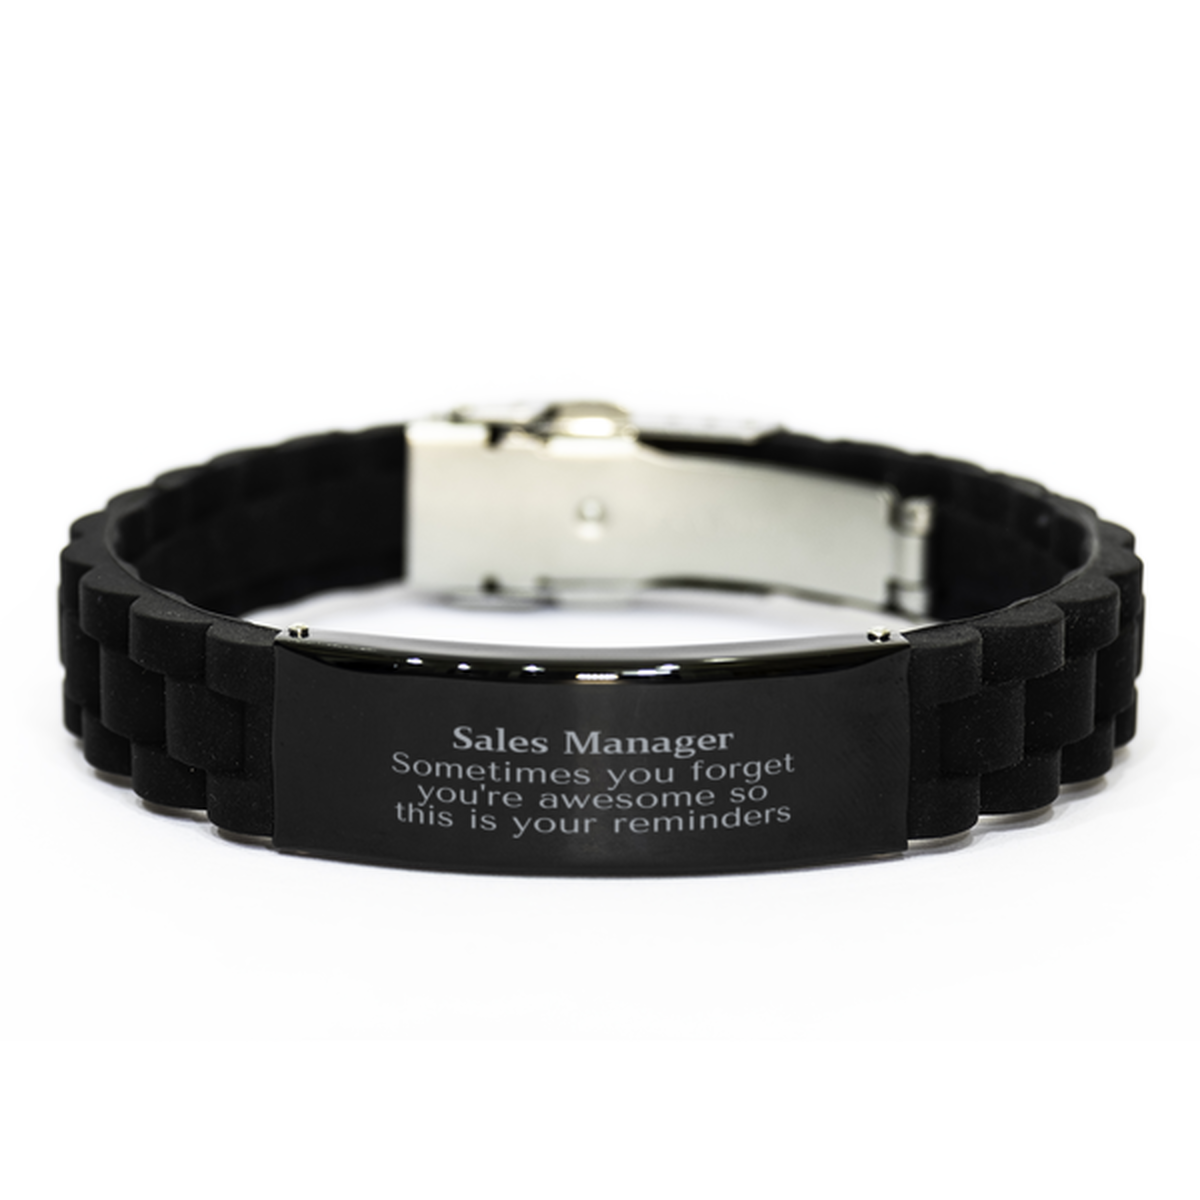 Sentimental Sales Manager Black Glidelock Clasp Bracelet, Sales Manager Sometimes you forget you're awesome so this is your reminders, Graduation Christmas Birthday Gifts for Sales Manager, Men, Women, Coworkers